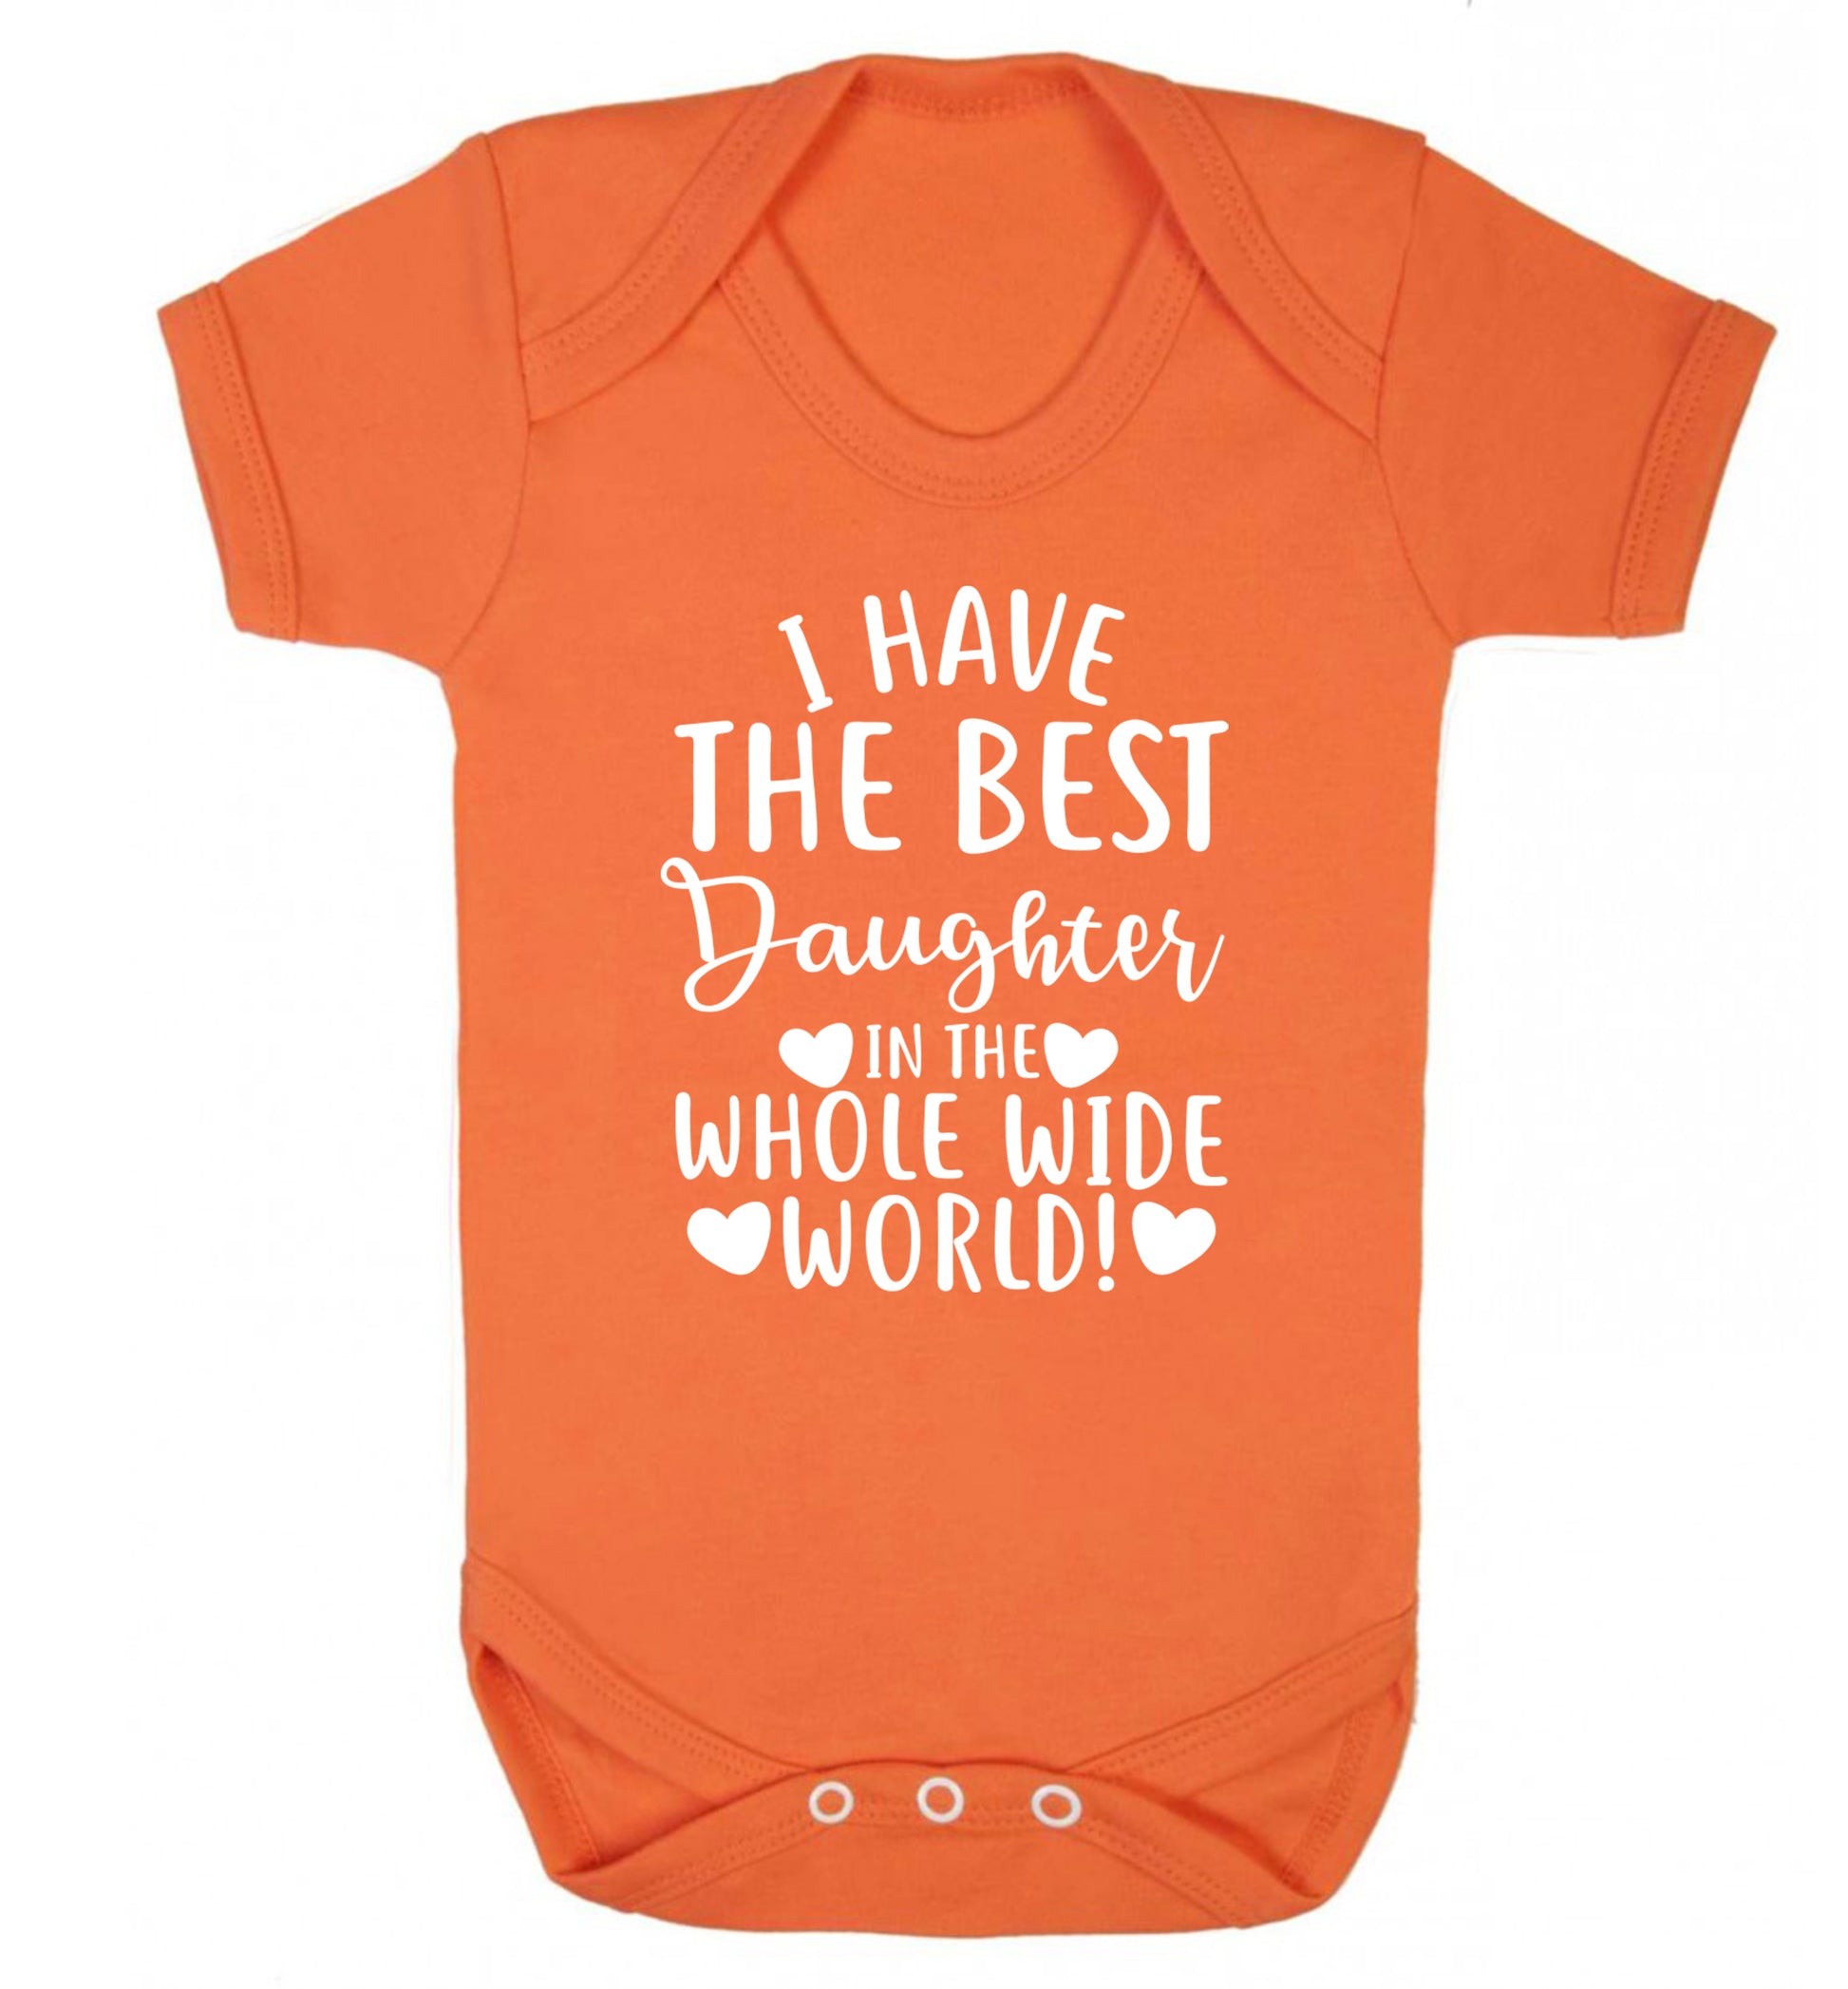 I have the best daughter in the whole wide world! Baby Vest orange 18-24 months